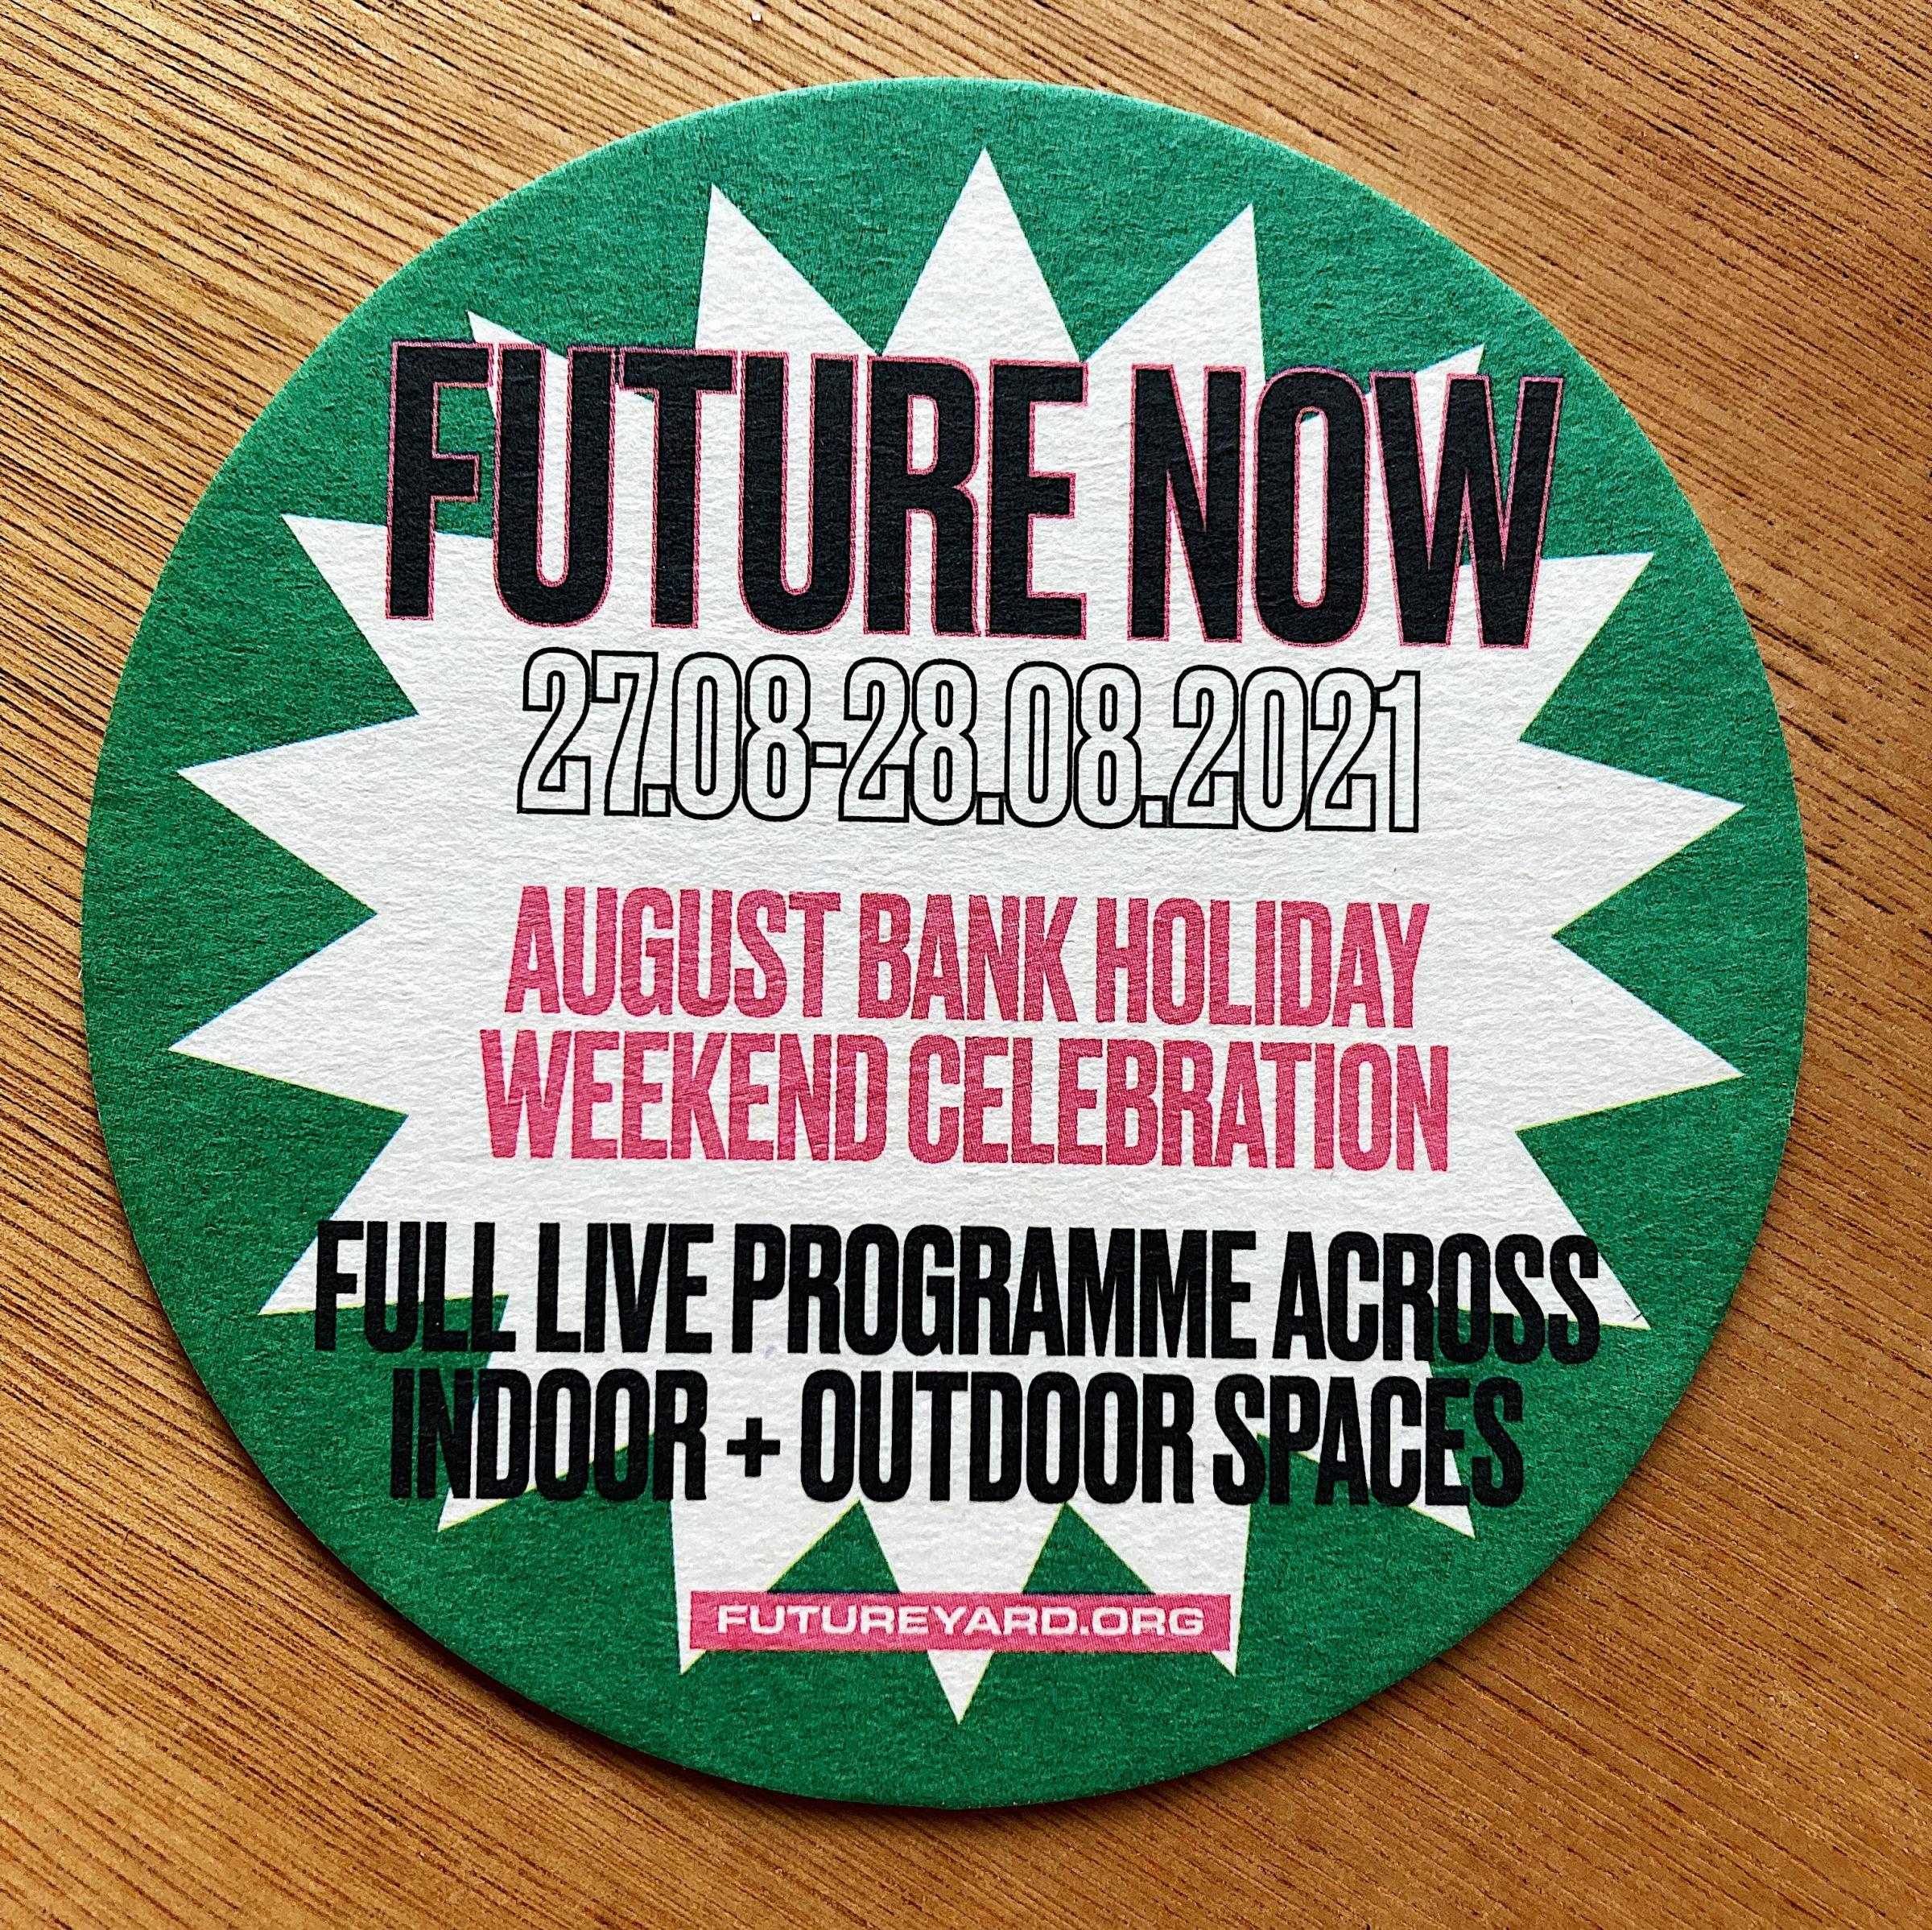 Future Yard in Birkenhead will play host to the Future Now festival this weekend